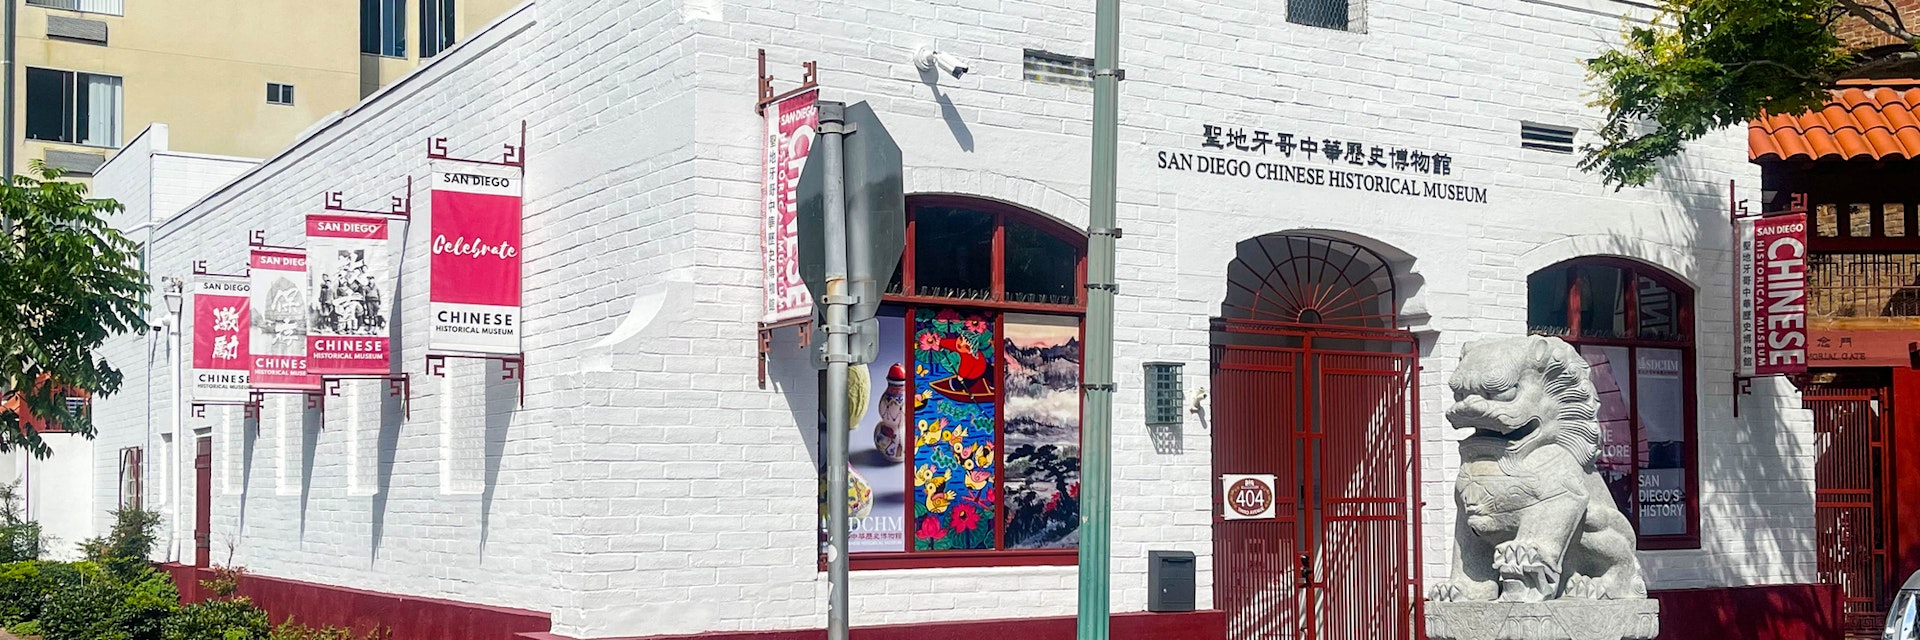 San Diego Chinese Historical Museum, an historic building at 404 Third Ave. in Gaslamp Quarter, San Diego, California, USA.  Built in 1927 as The Chinese Mission Building, this California Mission Revival-style building was designed by the architect Louis Gill and was moved to this site in 1995.   The museum's exhibits share the heritage of San Diego's Chinese community and the essence of Chinese arts and culture.
1687605693